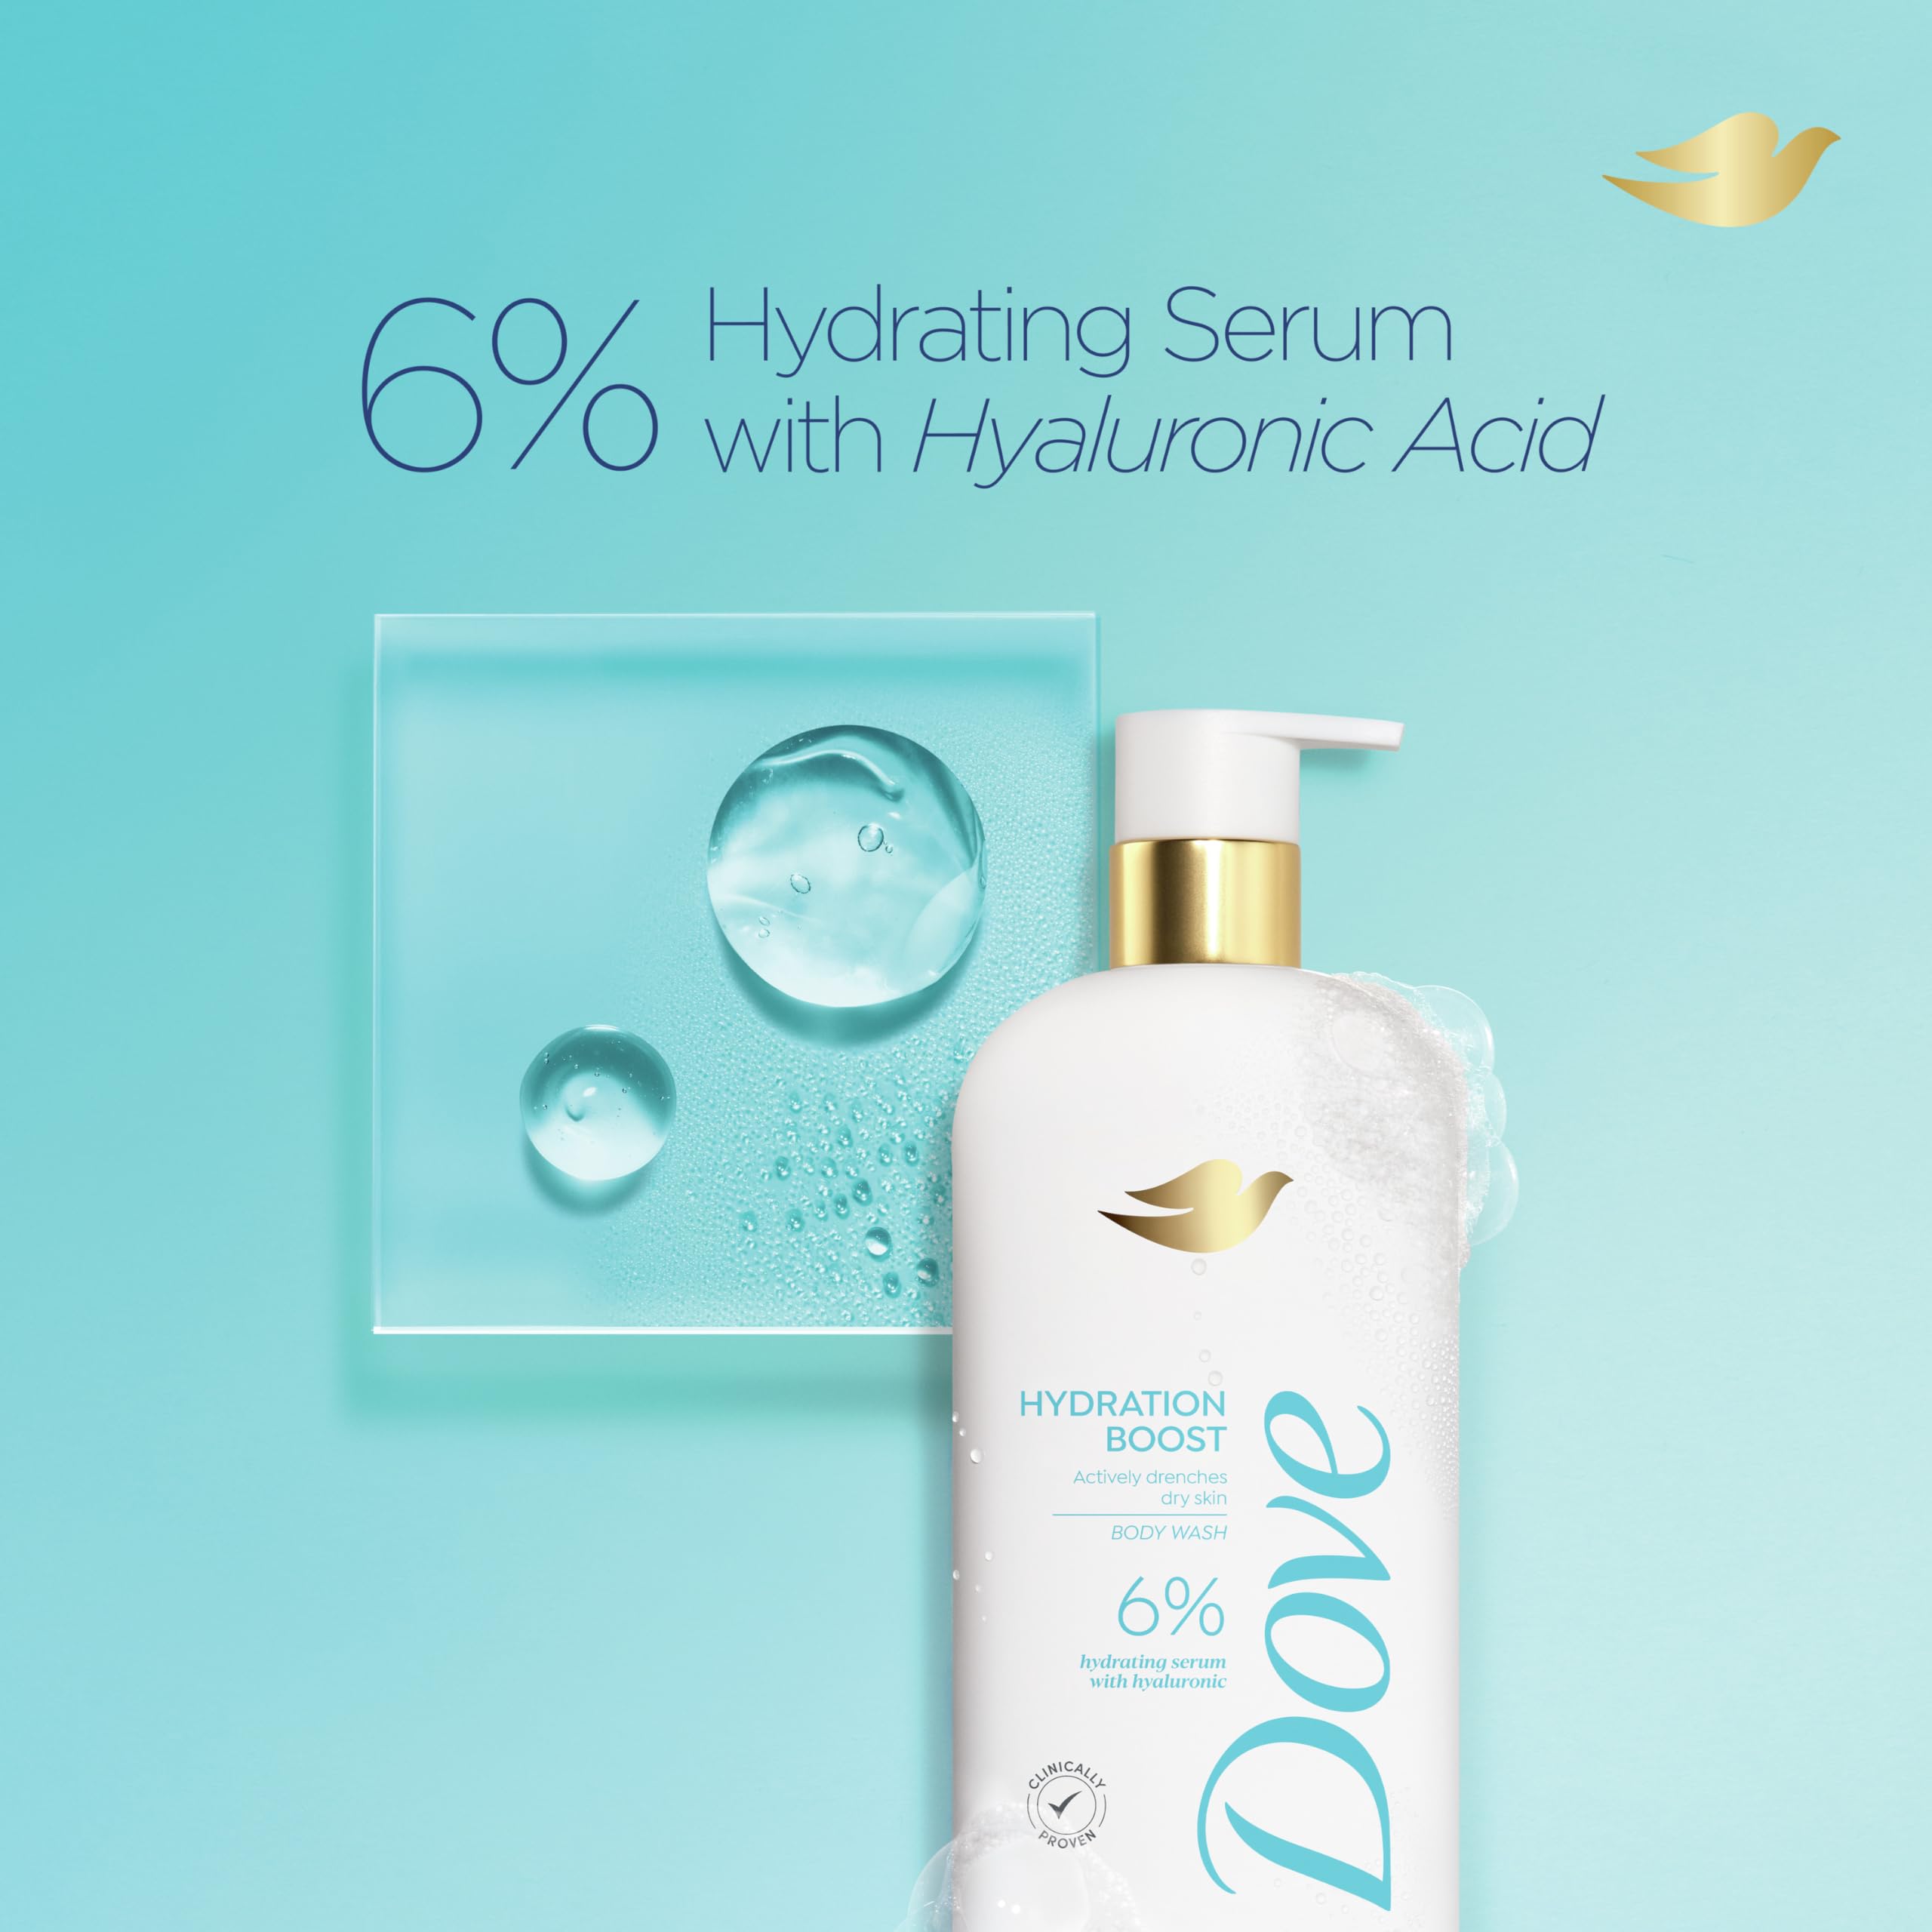 Dove Body Wash Hydration Boost Actively drenches dry skin 6% hydration serum with hyaluronic 18.5 oz